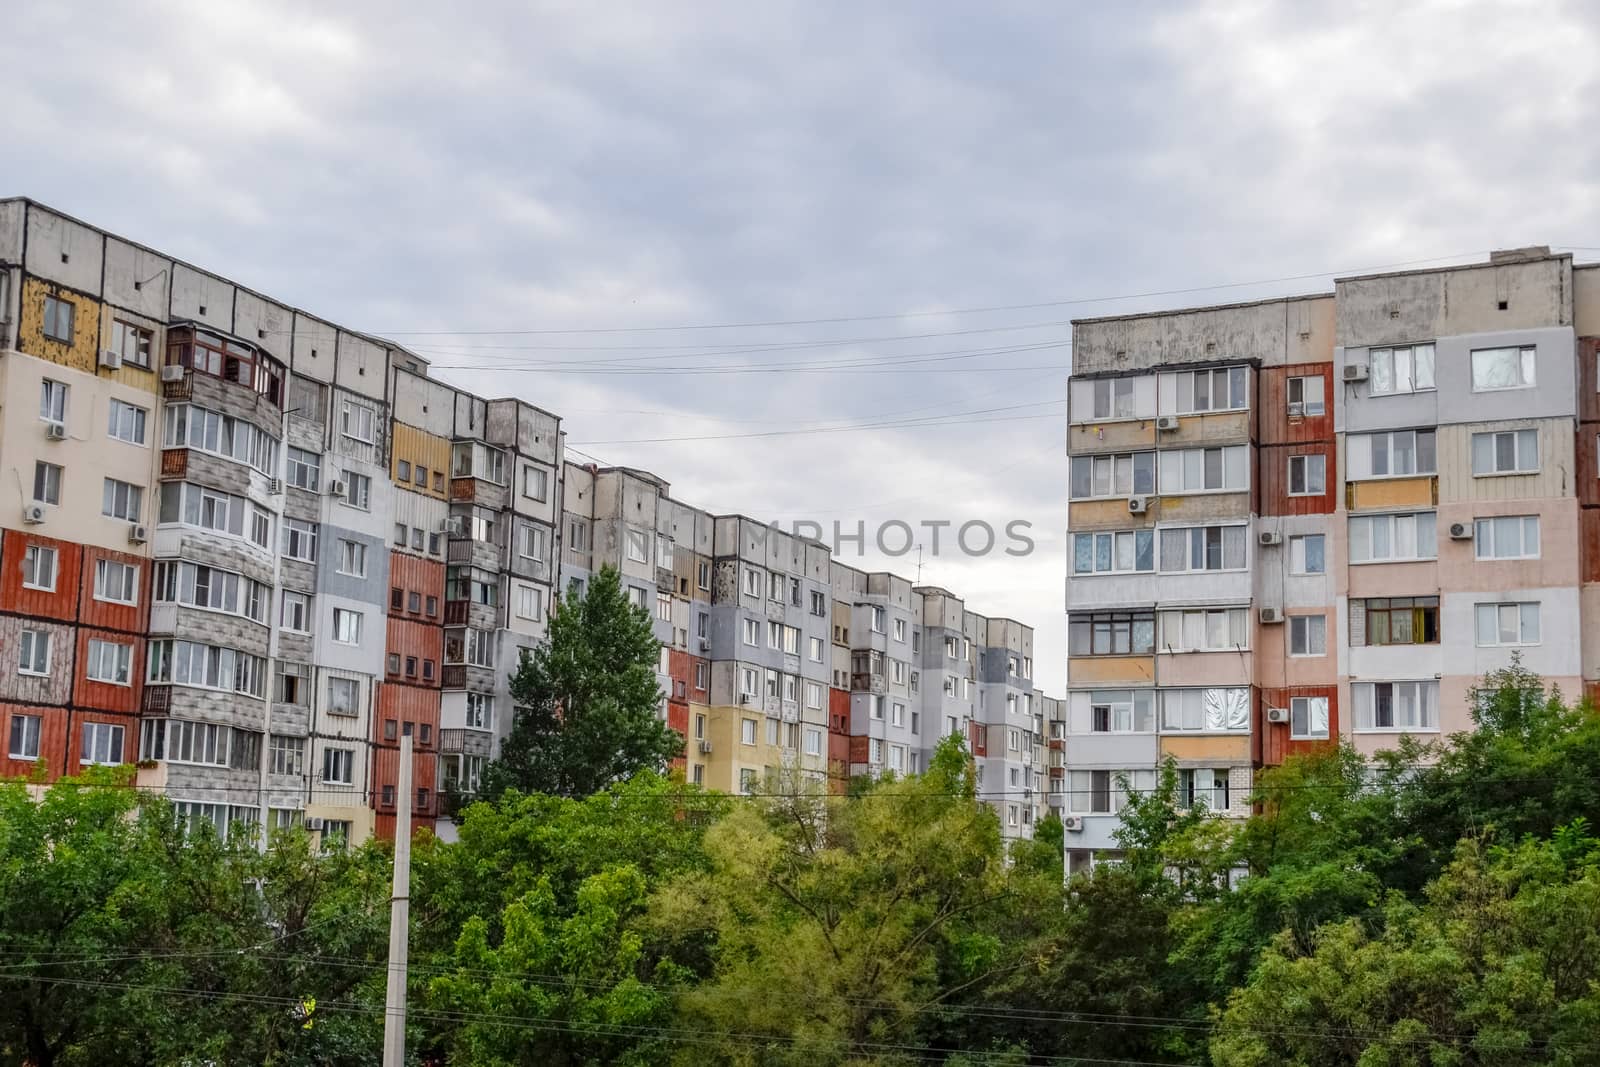 Multi-storey houses in the city of Sevastopol. The streets of the city.